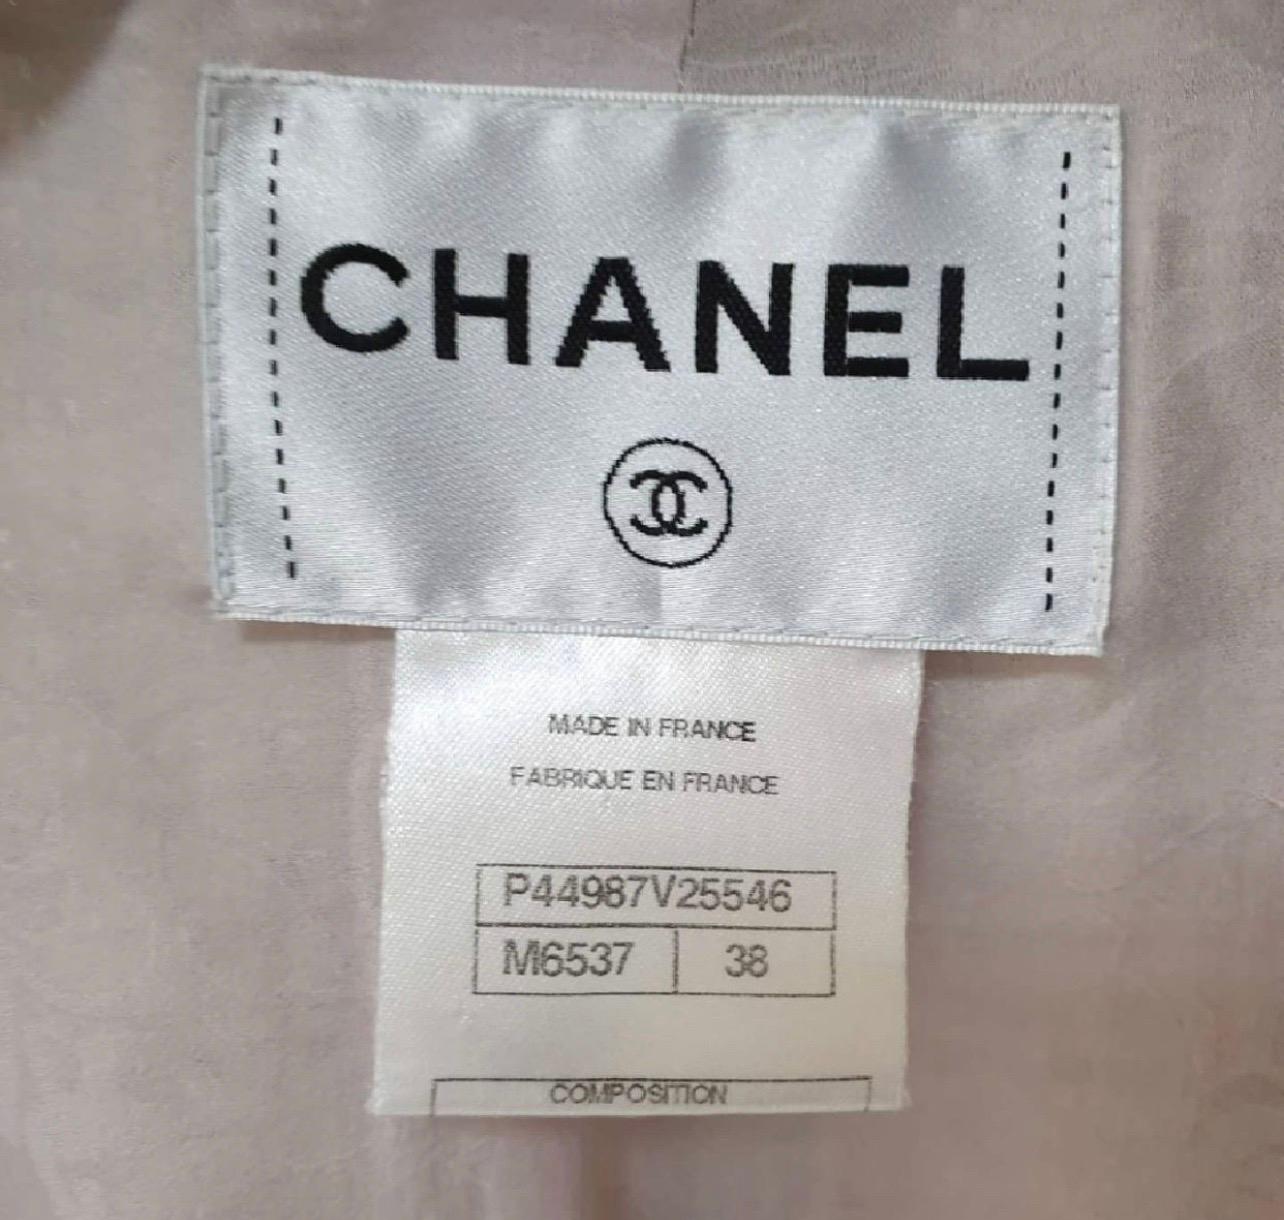 GUARANTEED AUTHENTIC CHANEL RUNWAY 13C VERSAILLES COLLECTION 
GORGEOUS FANTASY TWEED JACKET

Design:
- Iconic Chanel fantasy tweed jacket crafted with ricrac trim from the Runway 13C Versailles Collection.
- Notch lapels.
- Pastel colors.
- Dual